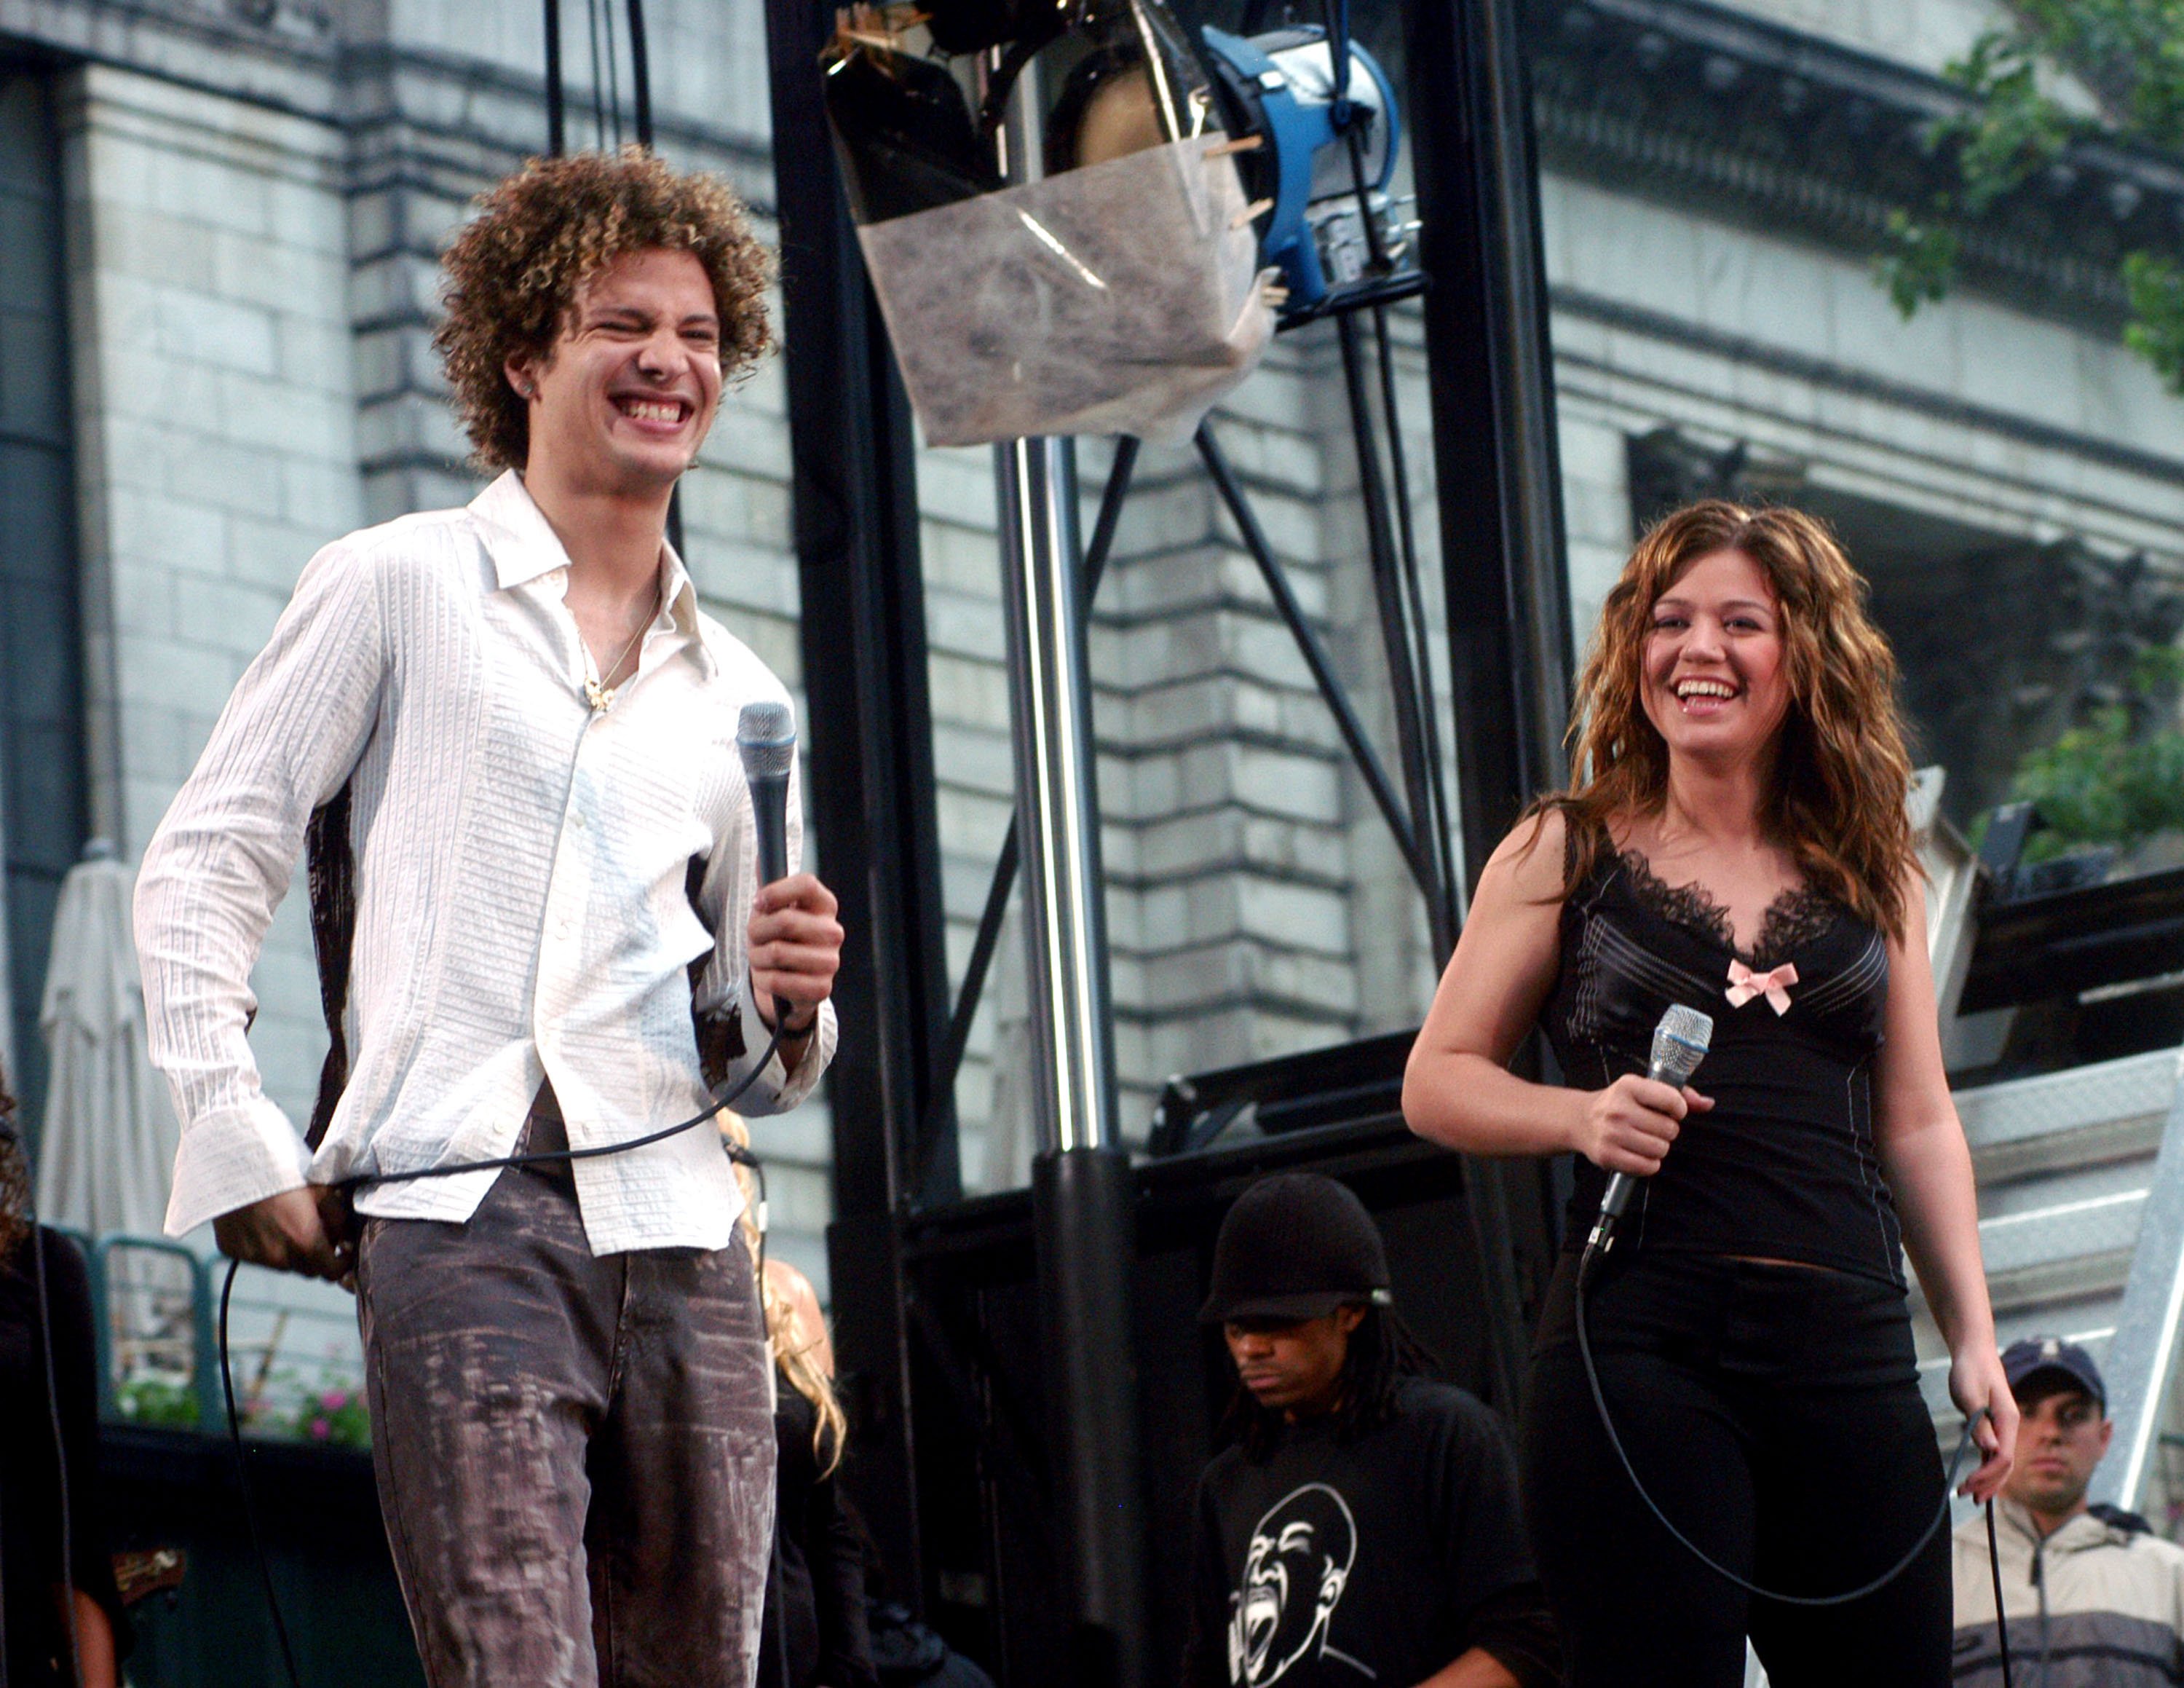  Kelly Clarkson during her 2003 concert series of "Good Morning America" with Justin Guarini in New York City. | Photo: Getty Images